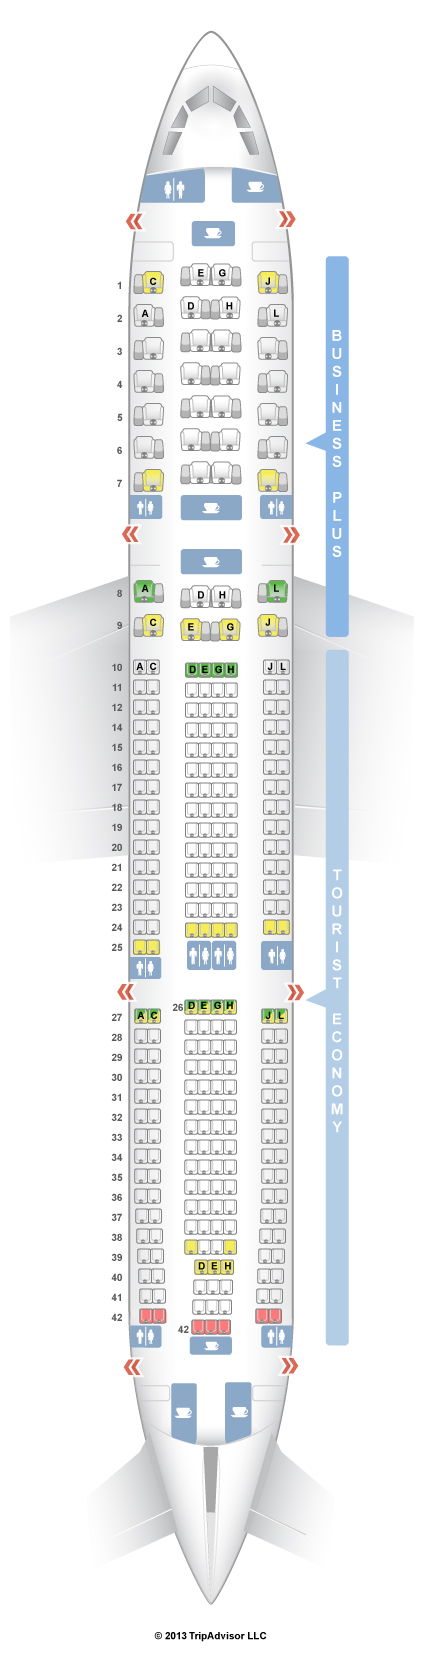 Iberia Airlines Seating Chart